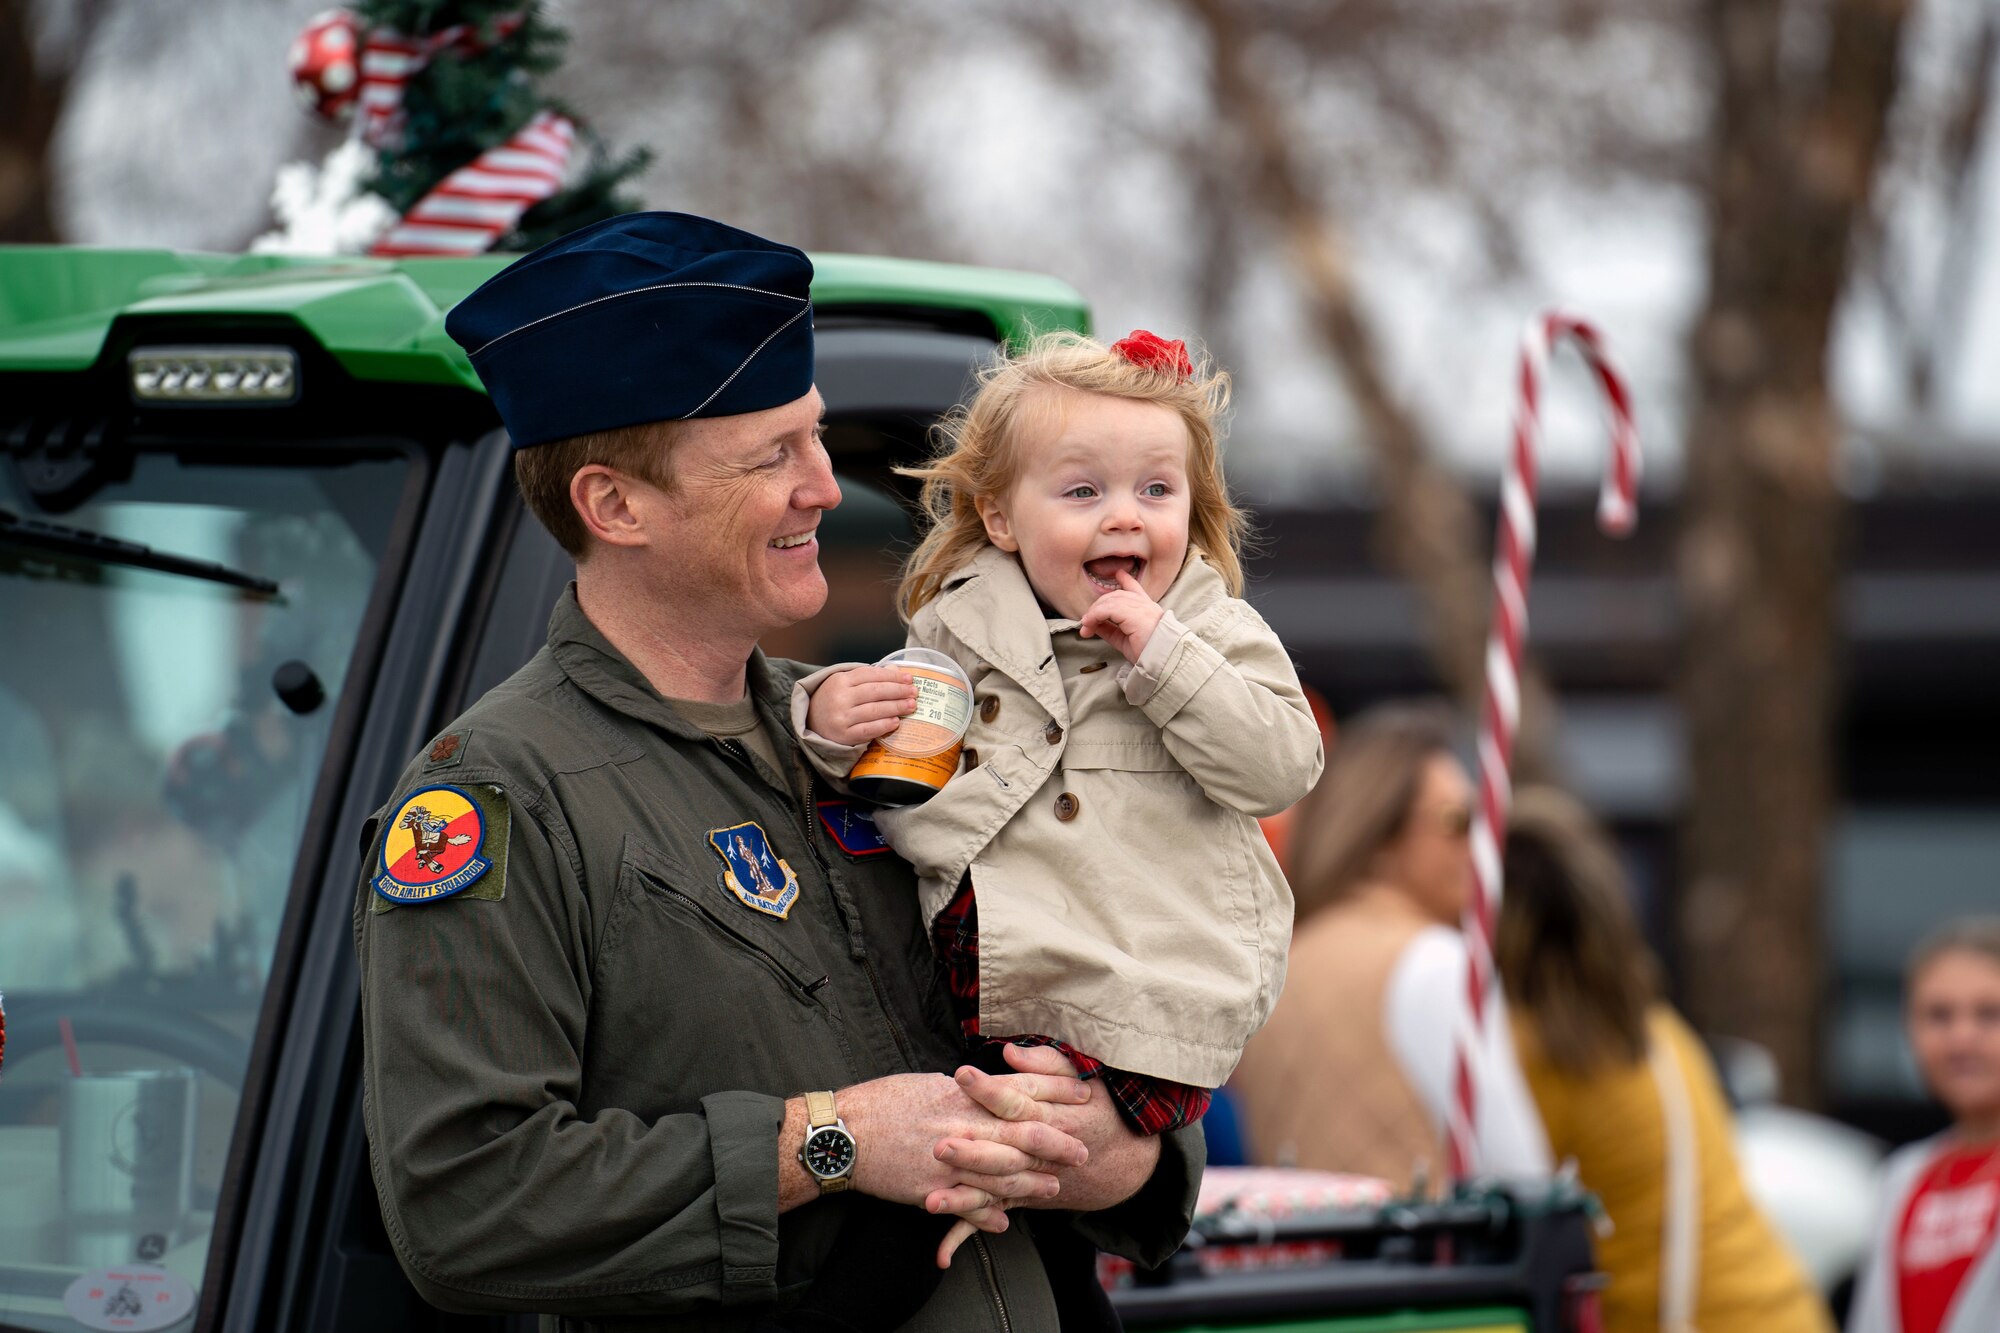 An Airmen holds a little girl in his arms